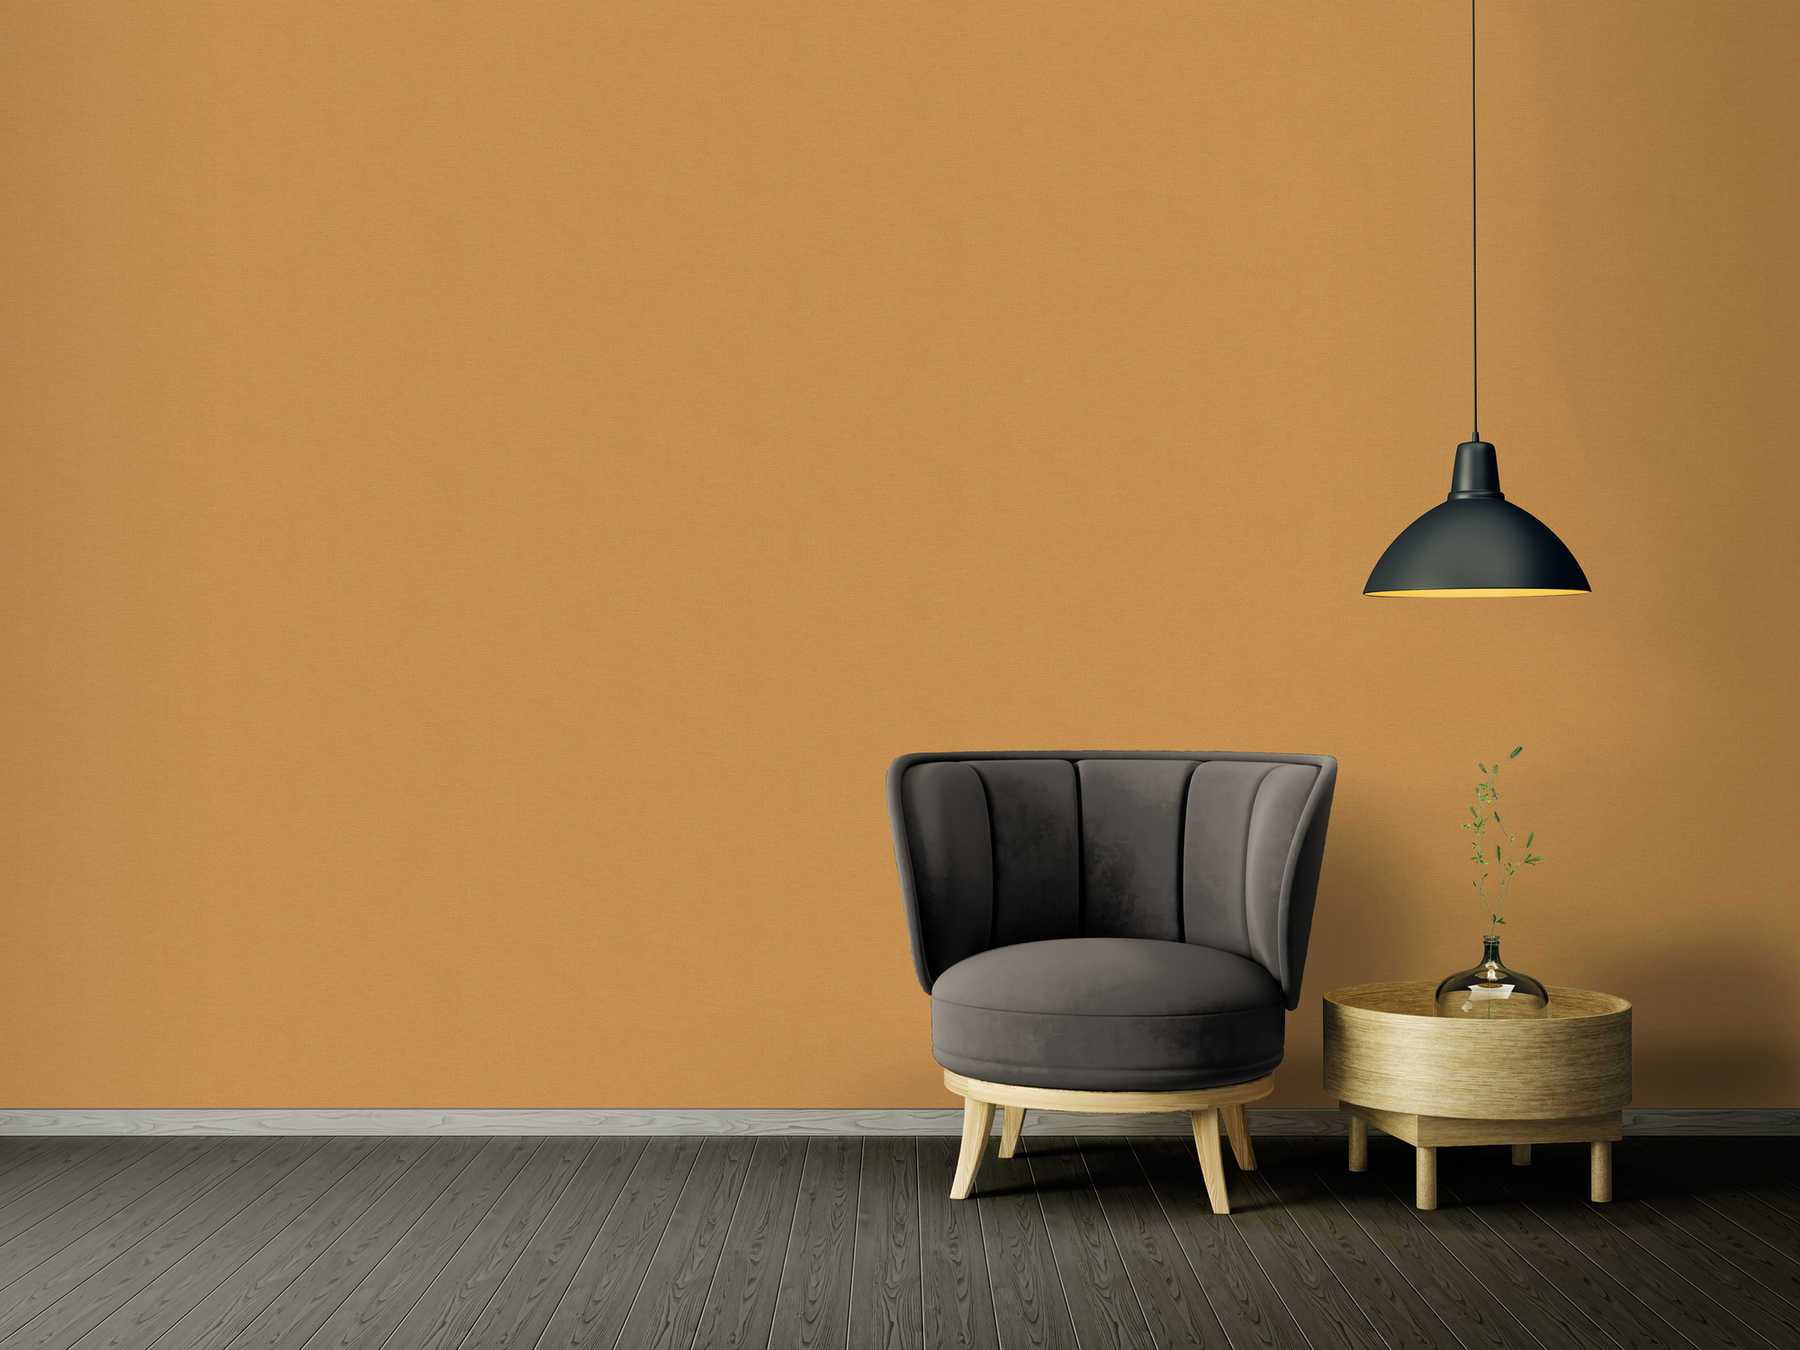             Wallpaper mustard yellow plain with linen look & structure embossing
        